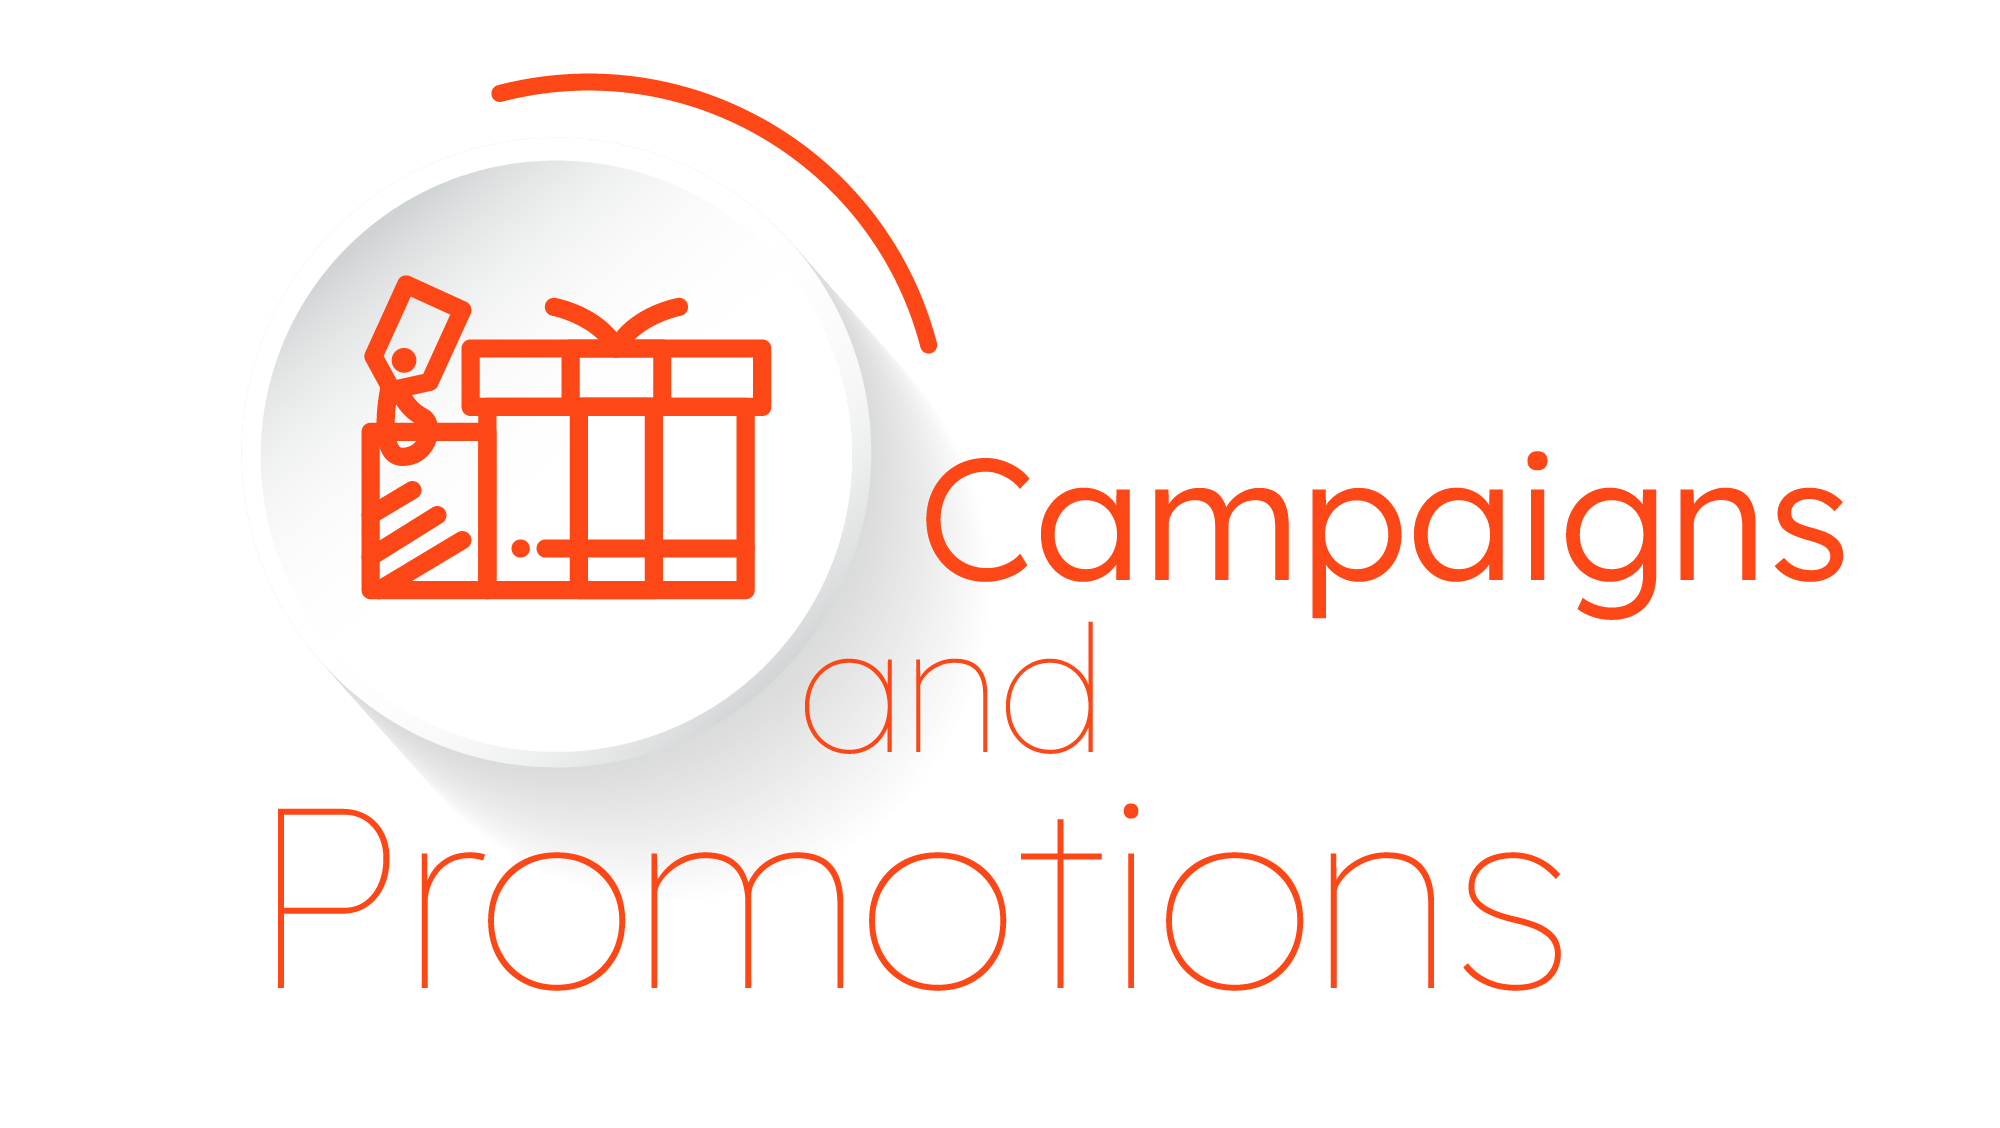 Campaigns and Promotions